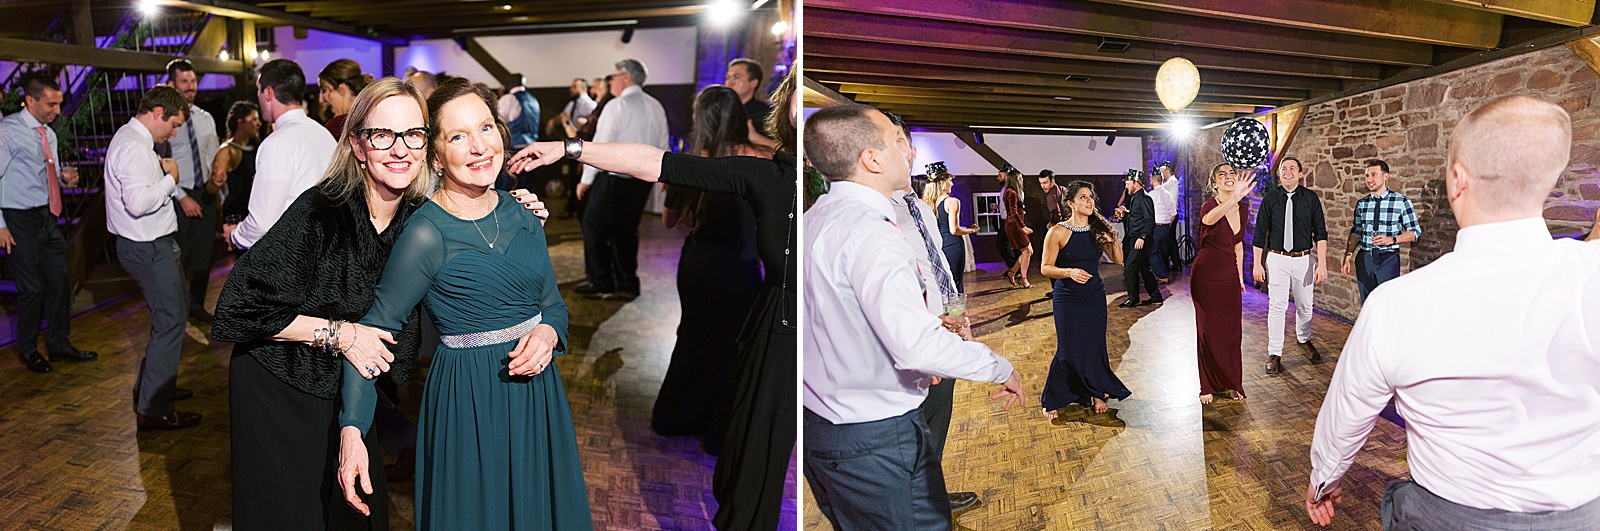 New Years Eve Wedding at Barn on Bridge in Collegeville, PA